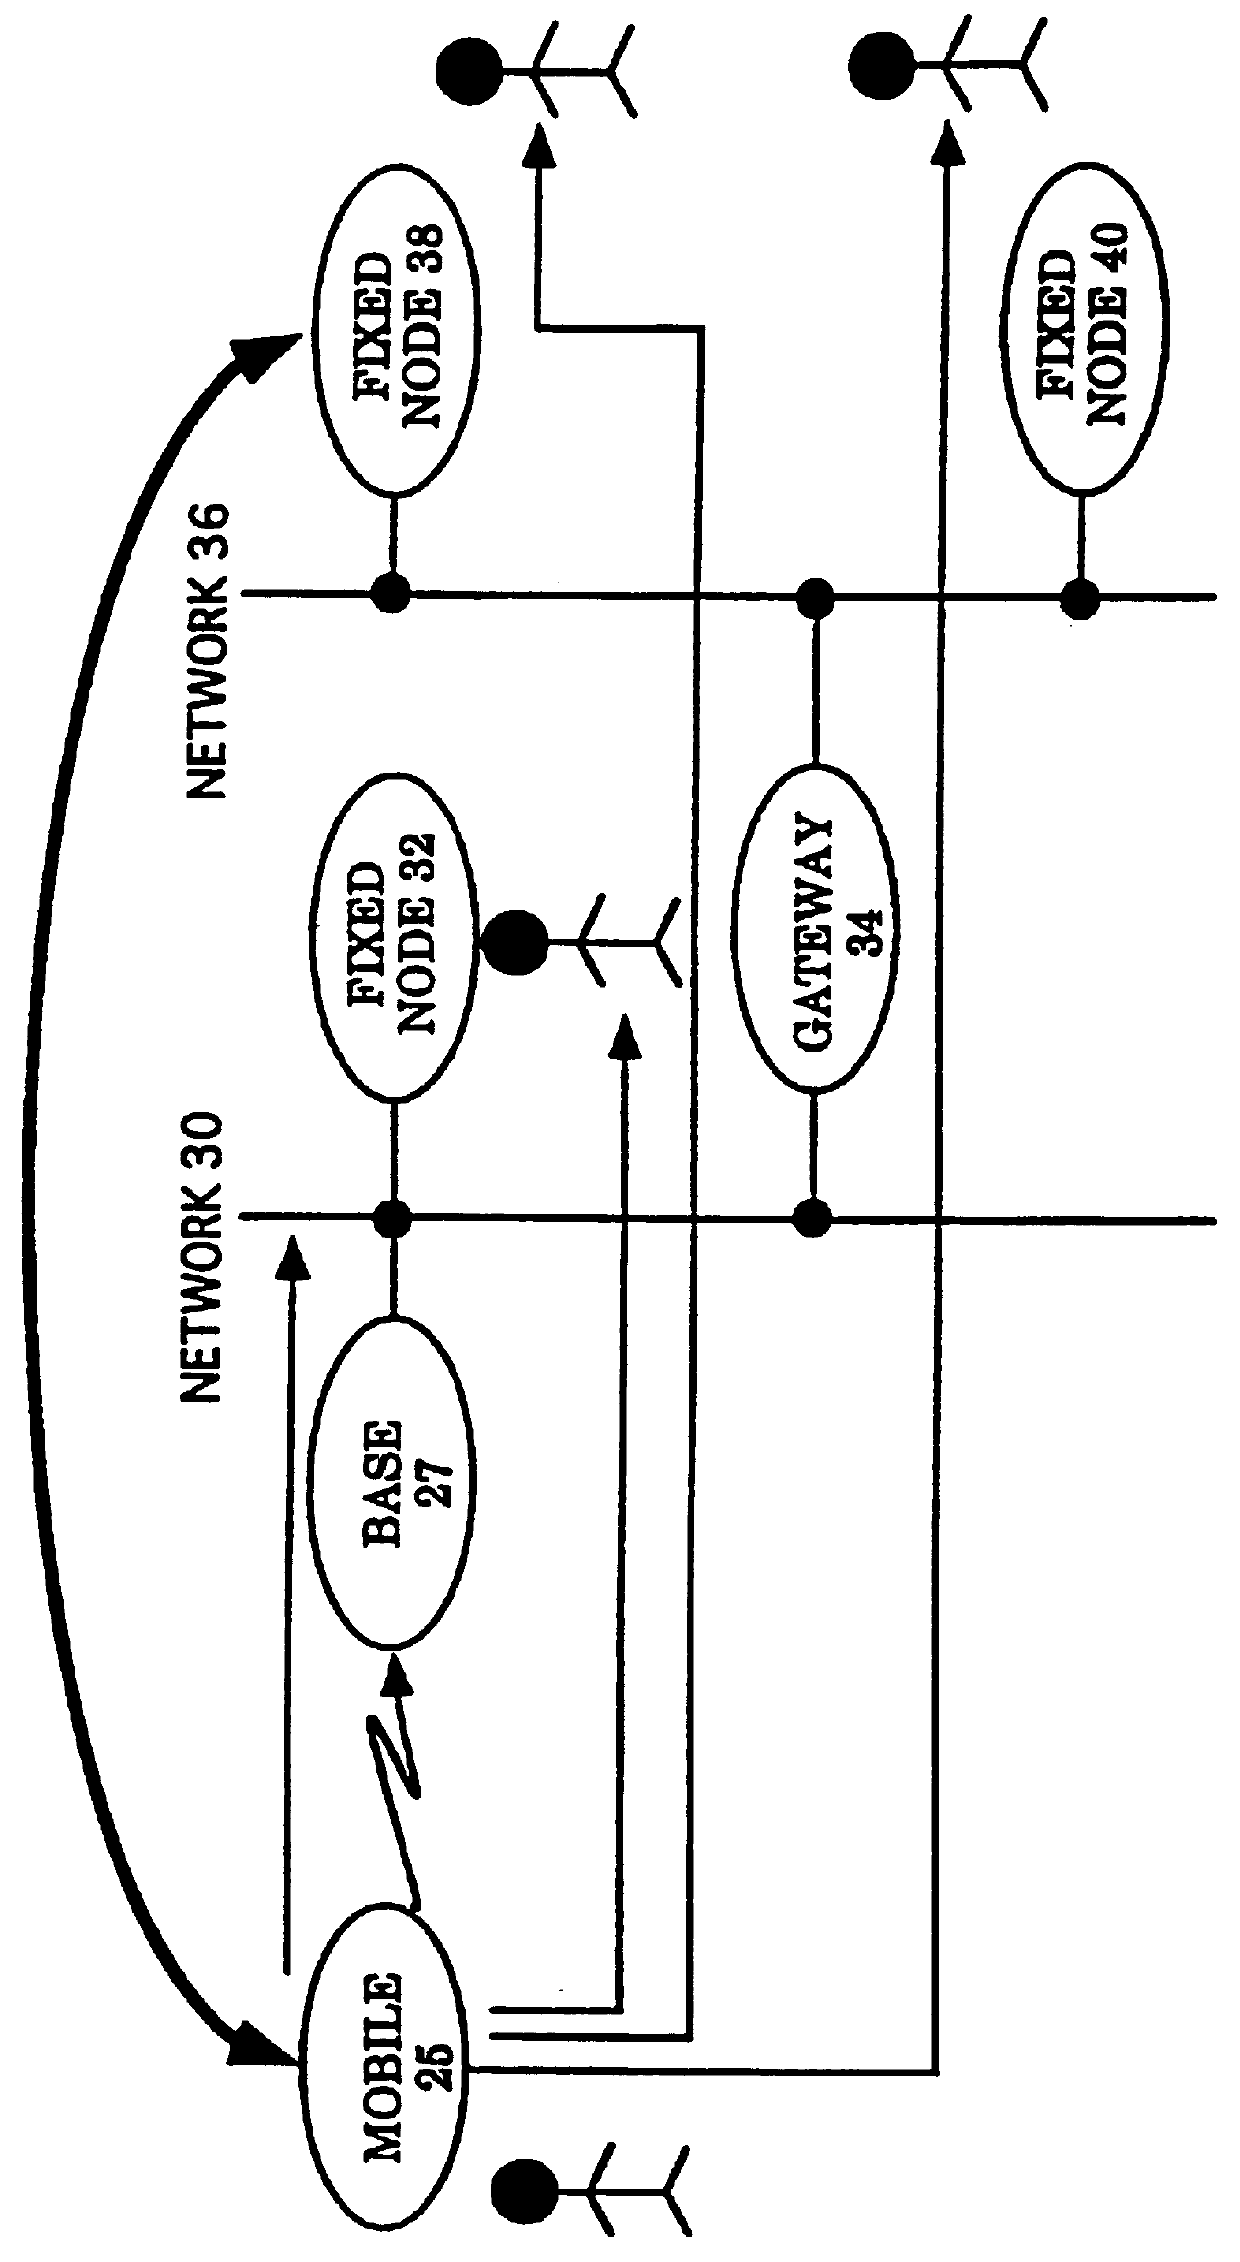 Method and apparatus for privacy and authentication in wireless networks